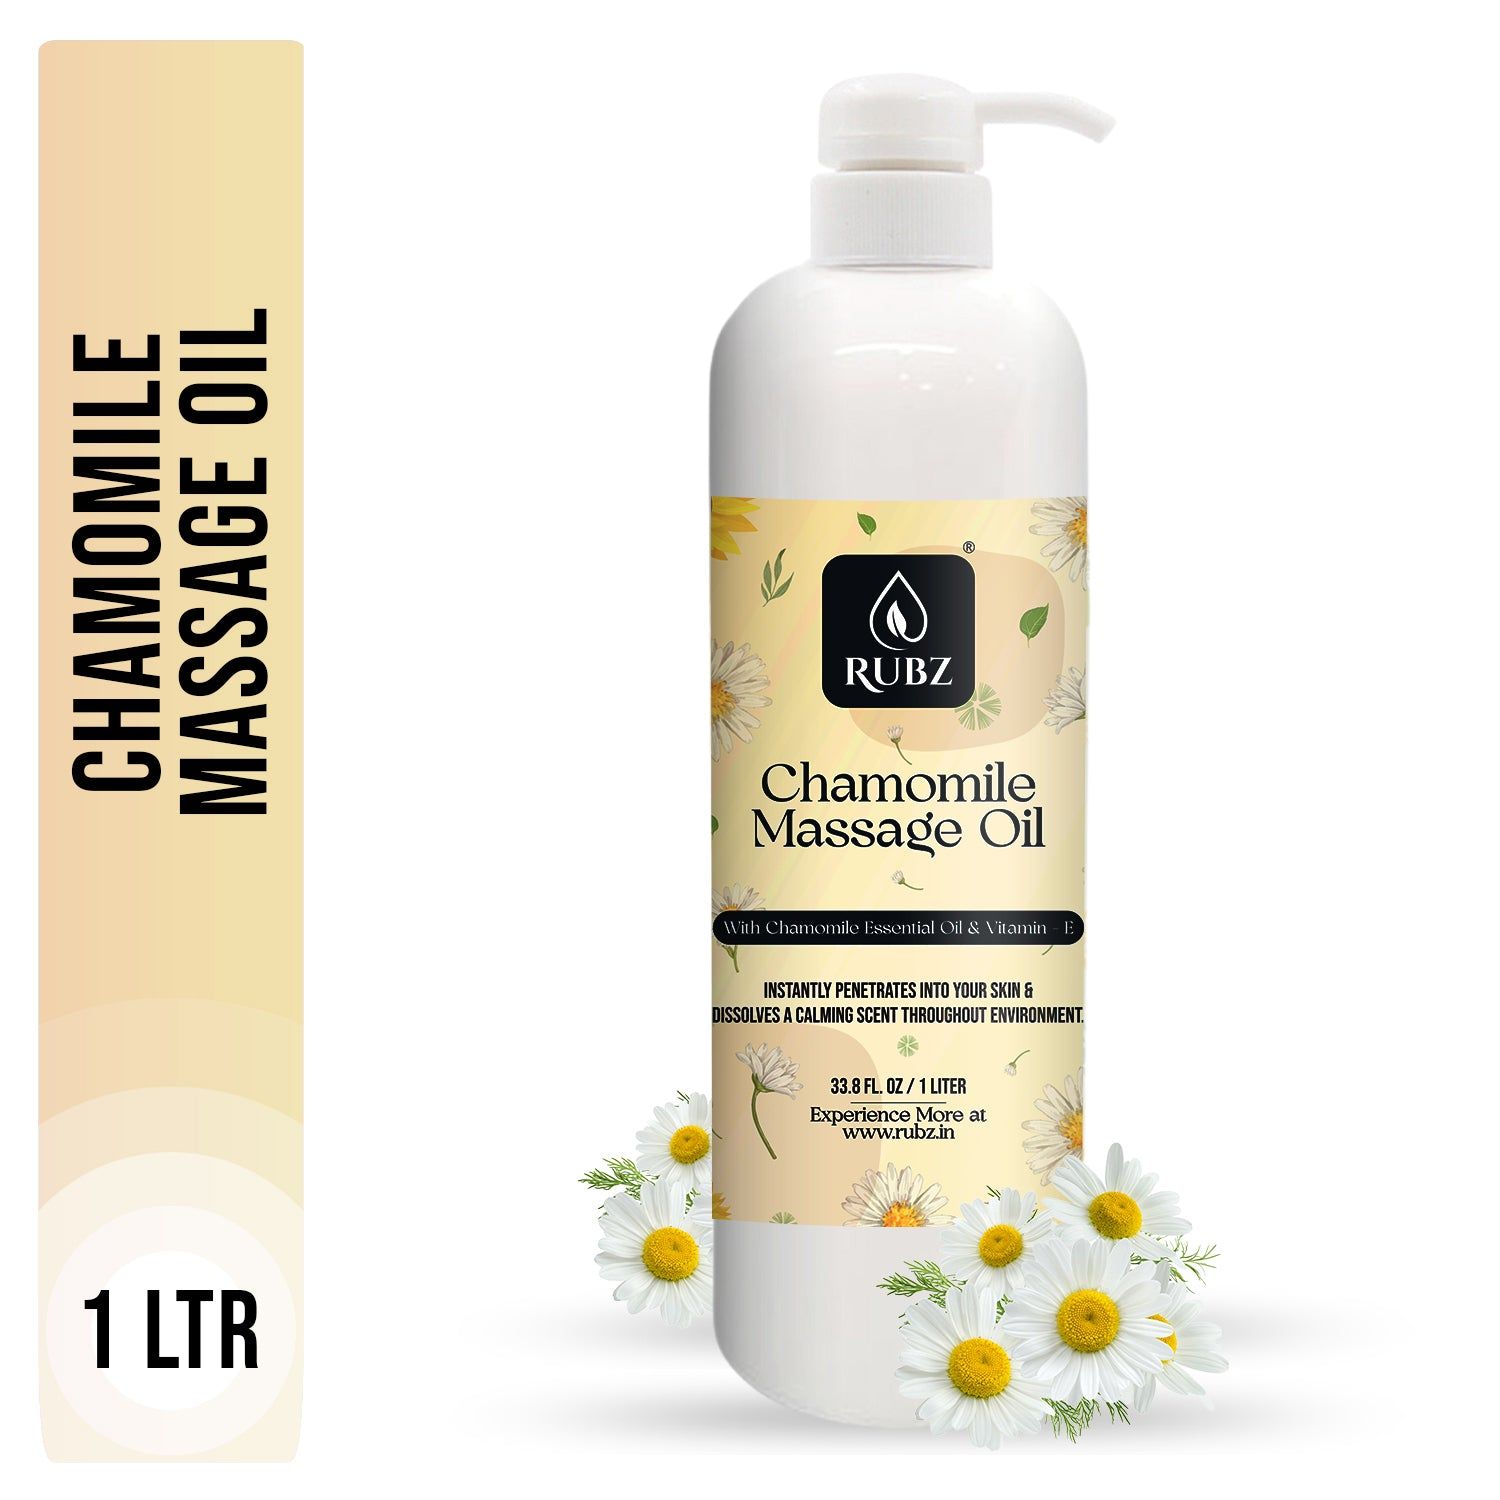 Rubz Chamomile Body Massage Oil | Relaxing, Soothing & Destressing Body Massage Oil for Men & Women | Best for Aromatherapy & Full Body Spa | 1 Litre